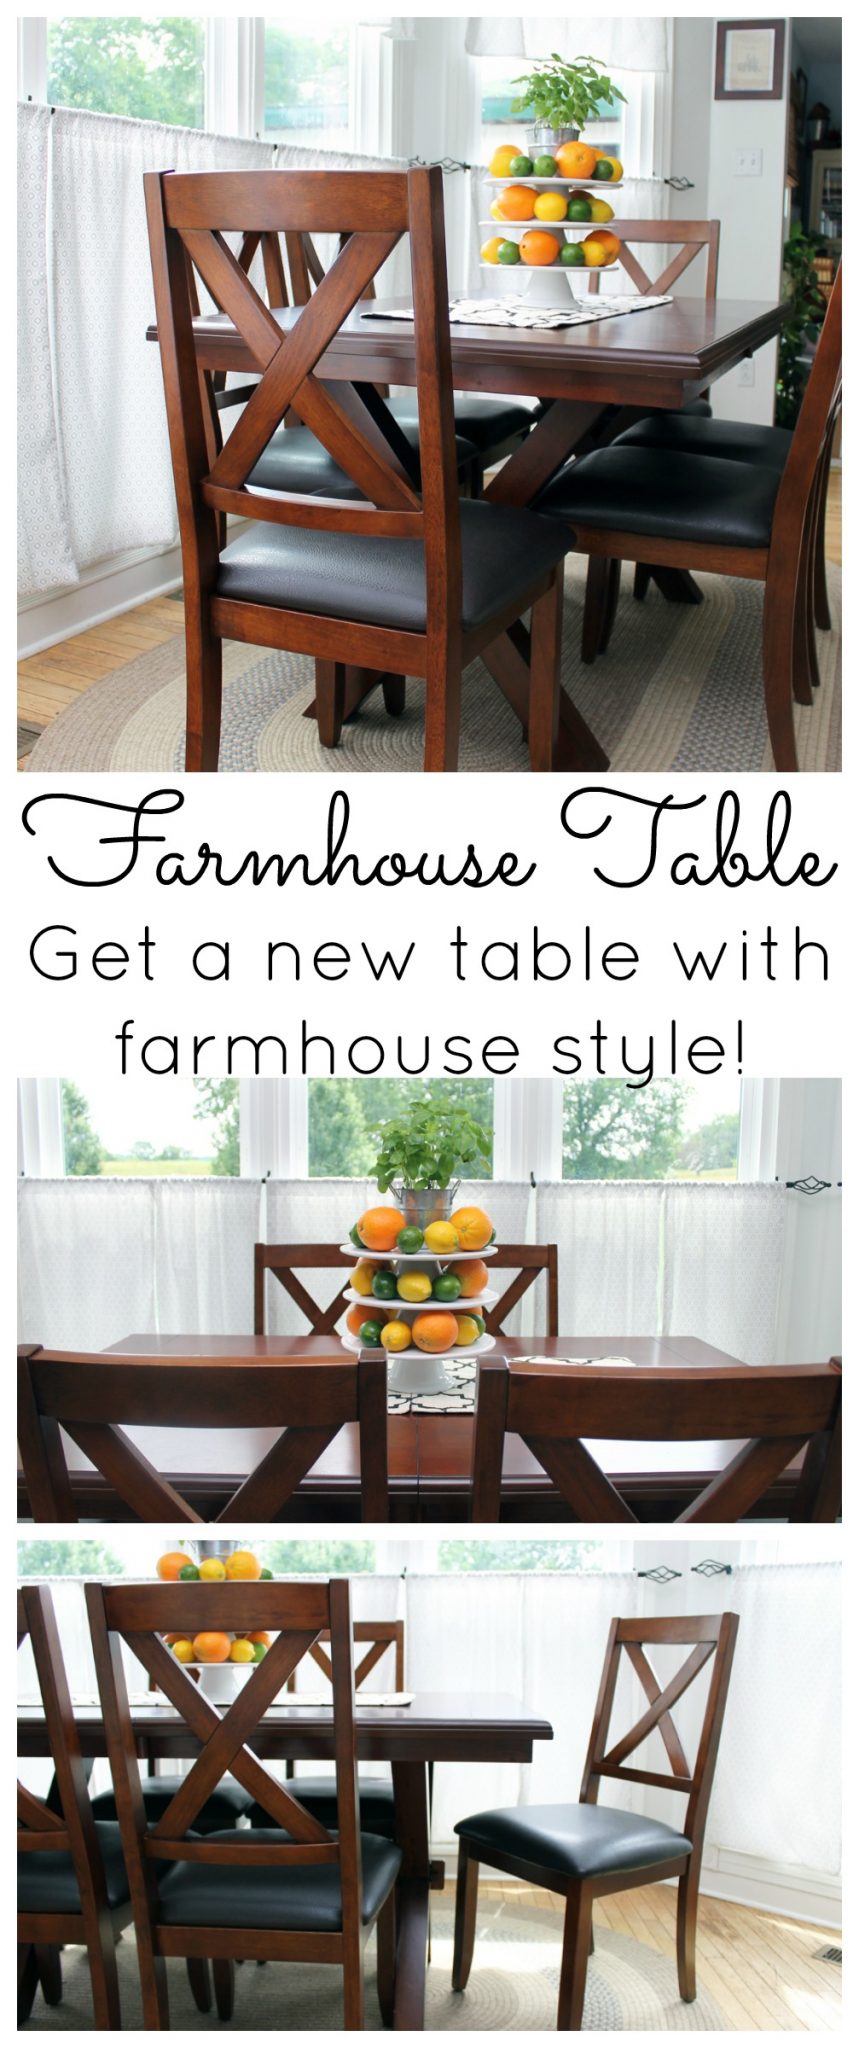 An addition of a farmhouse table makes a great statement in any home!